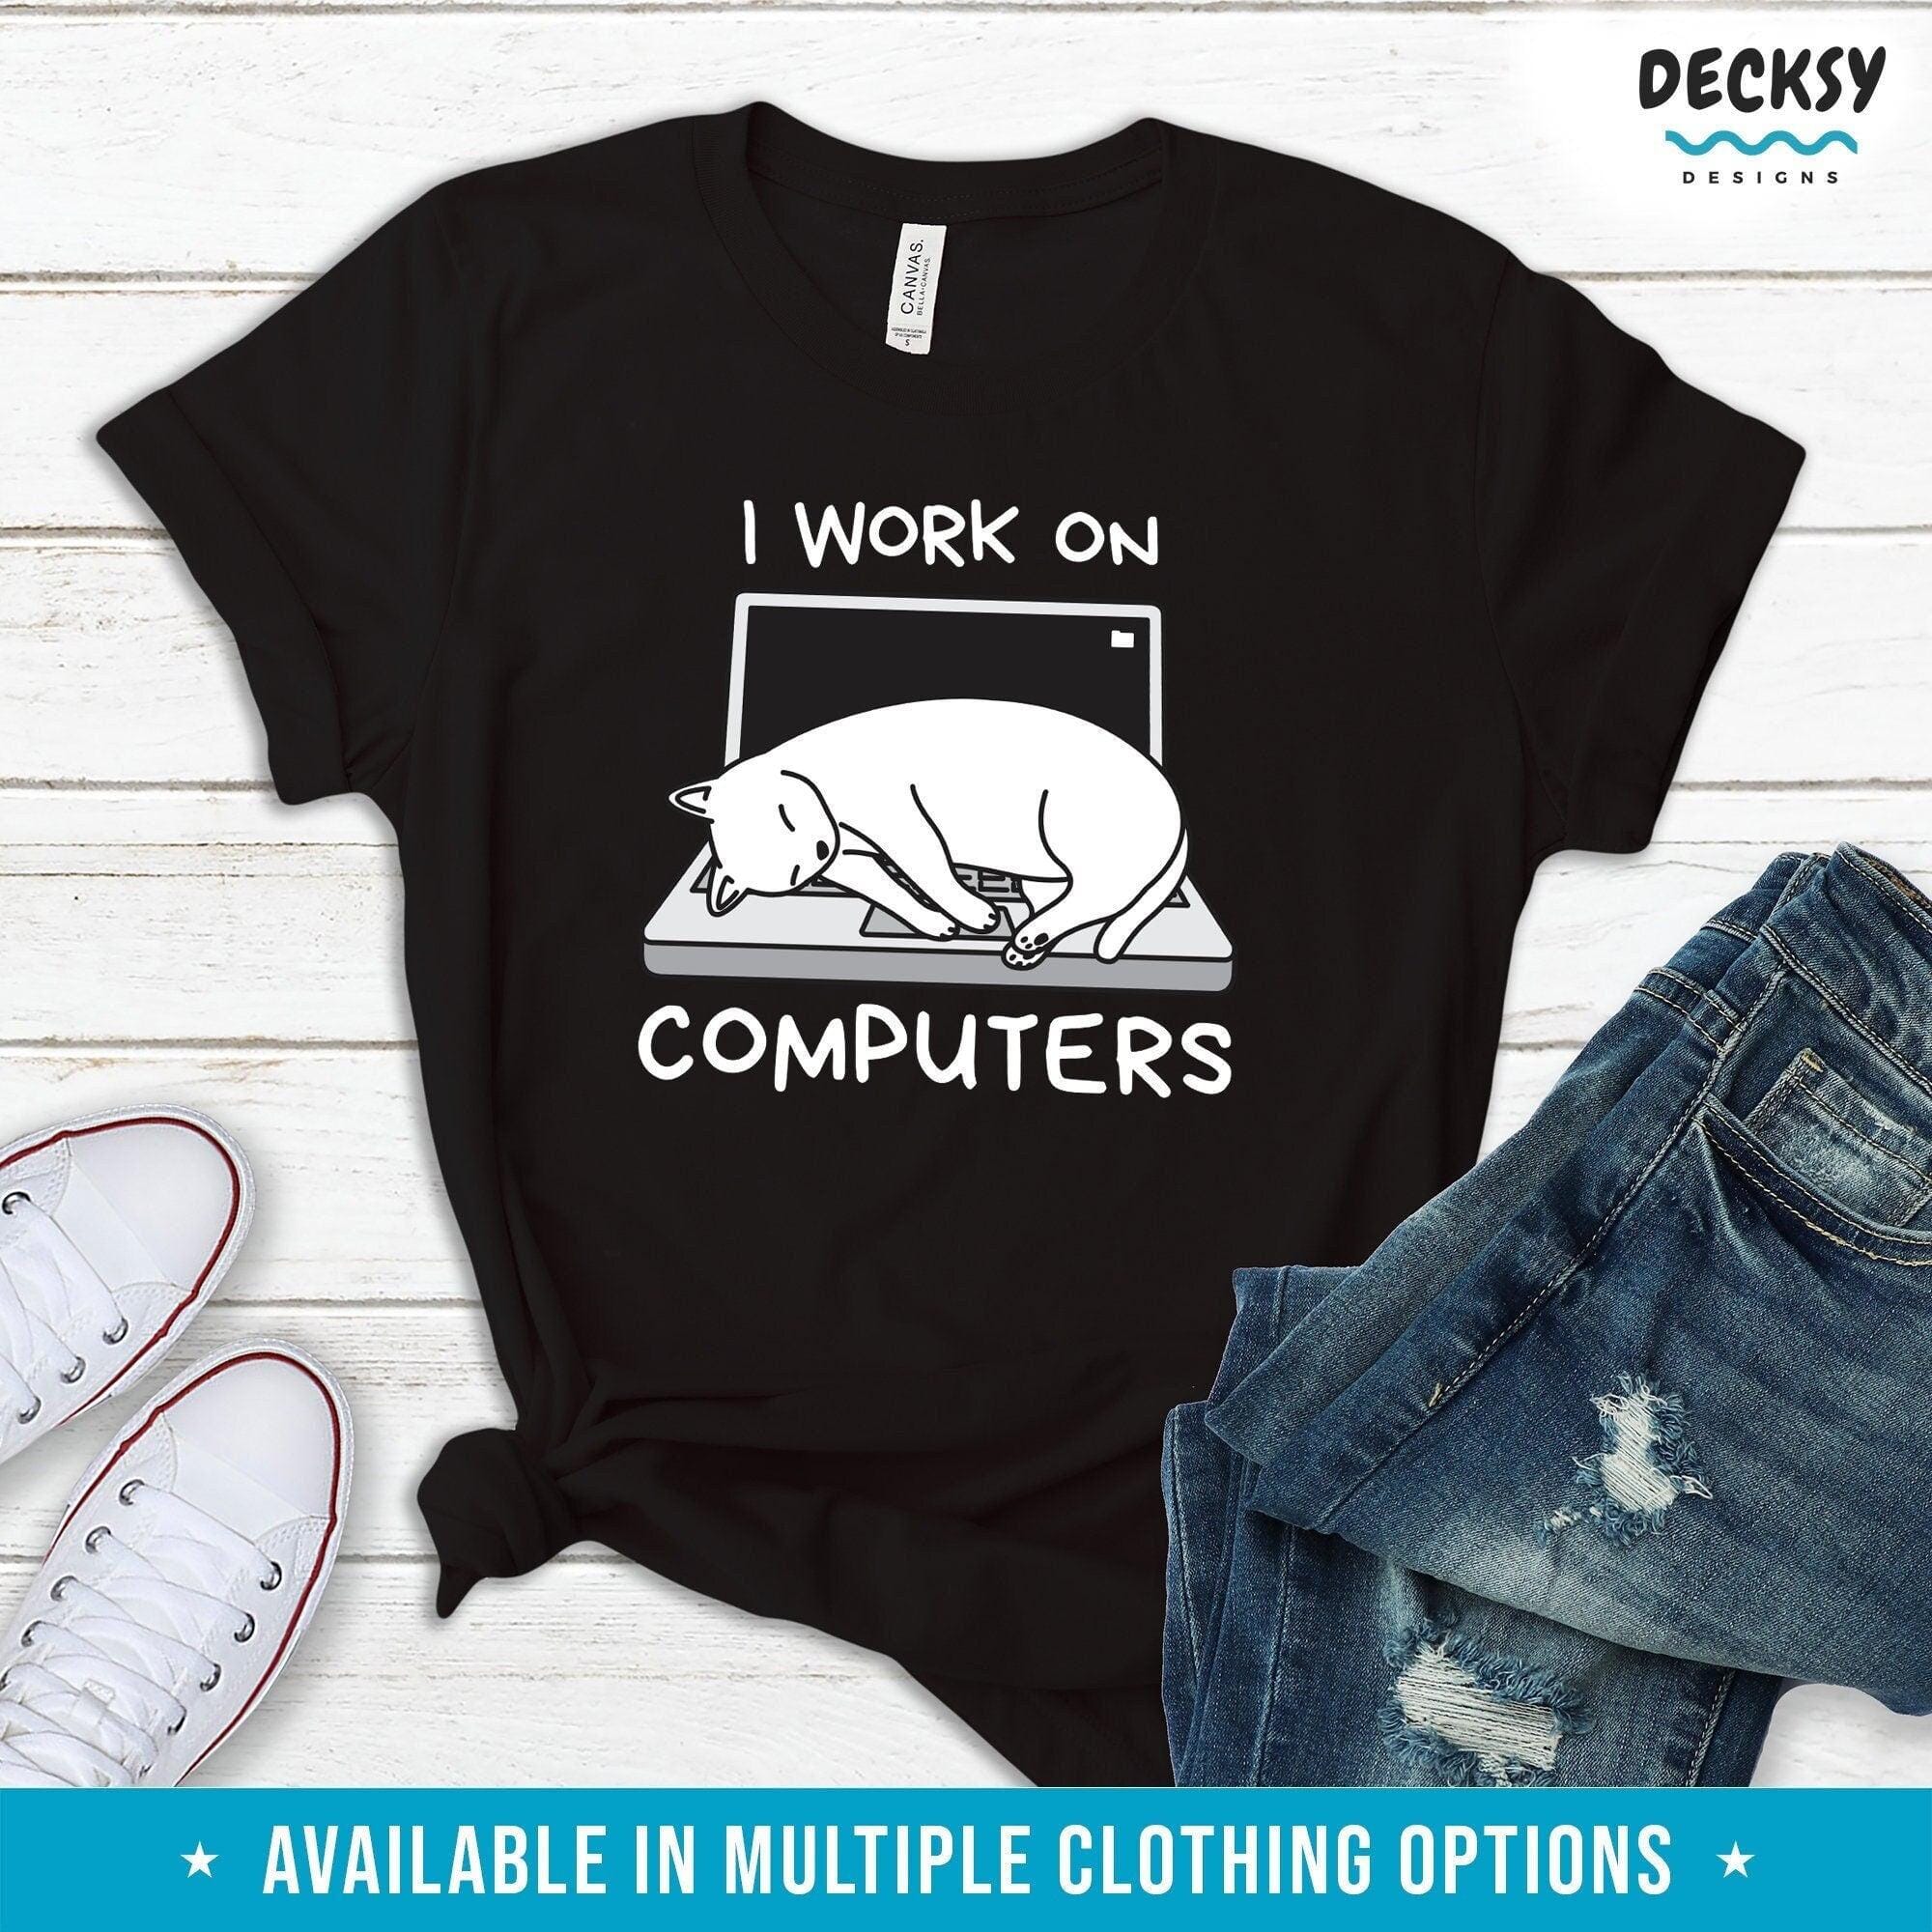 Funny Computer Cat T Shirt, Gift For Cat Lover-Clothing:Gender-Neutral Adult Clothing:Tops & Tees:T-shirts:Graphic Tees-DecksyDesigns